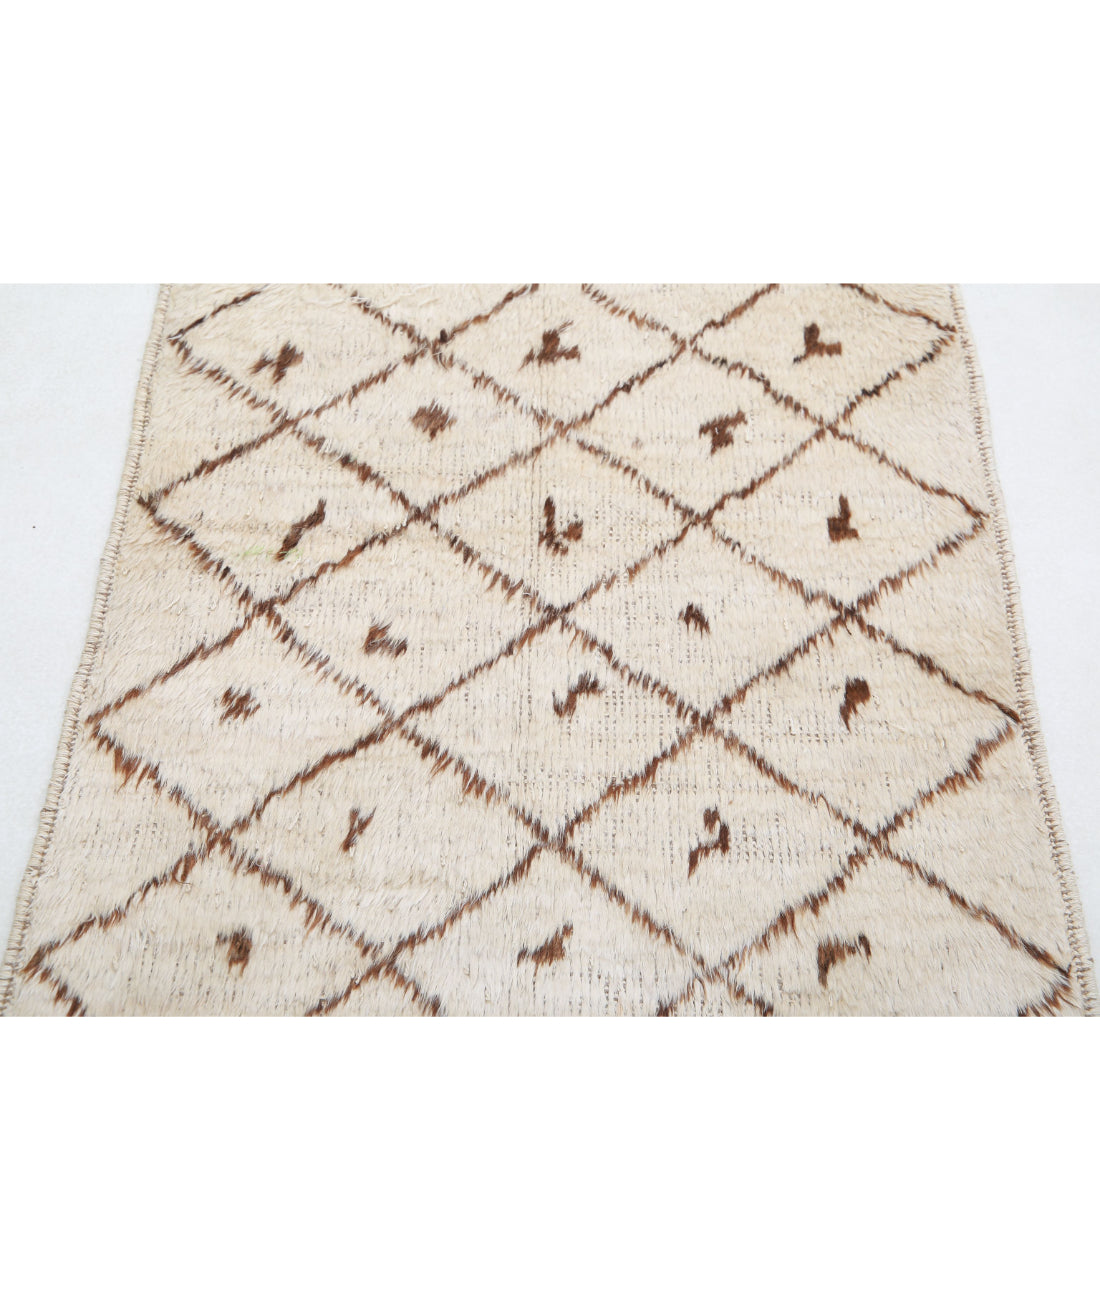 Hand Knotted Tribal Moroccan Wool Rug - 2'7'' x 2'10'' 2'7'' x 2'10'' (78 X 85) / Ivory / Taupe